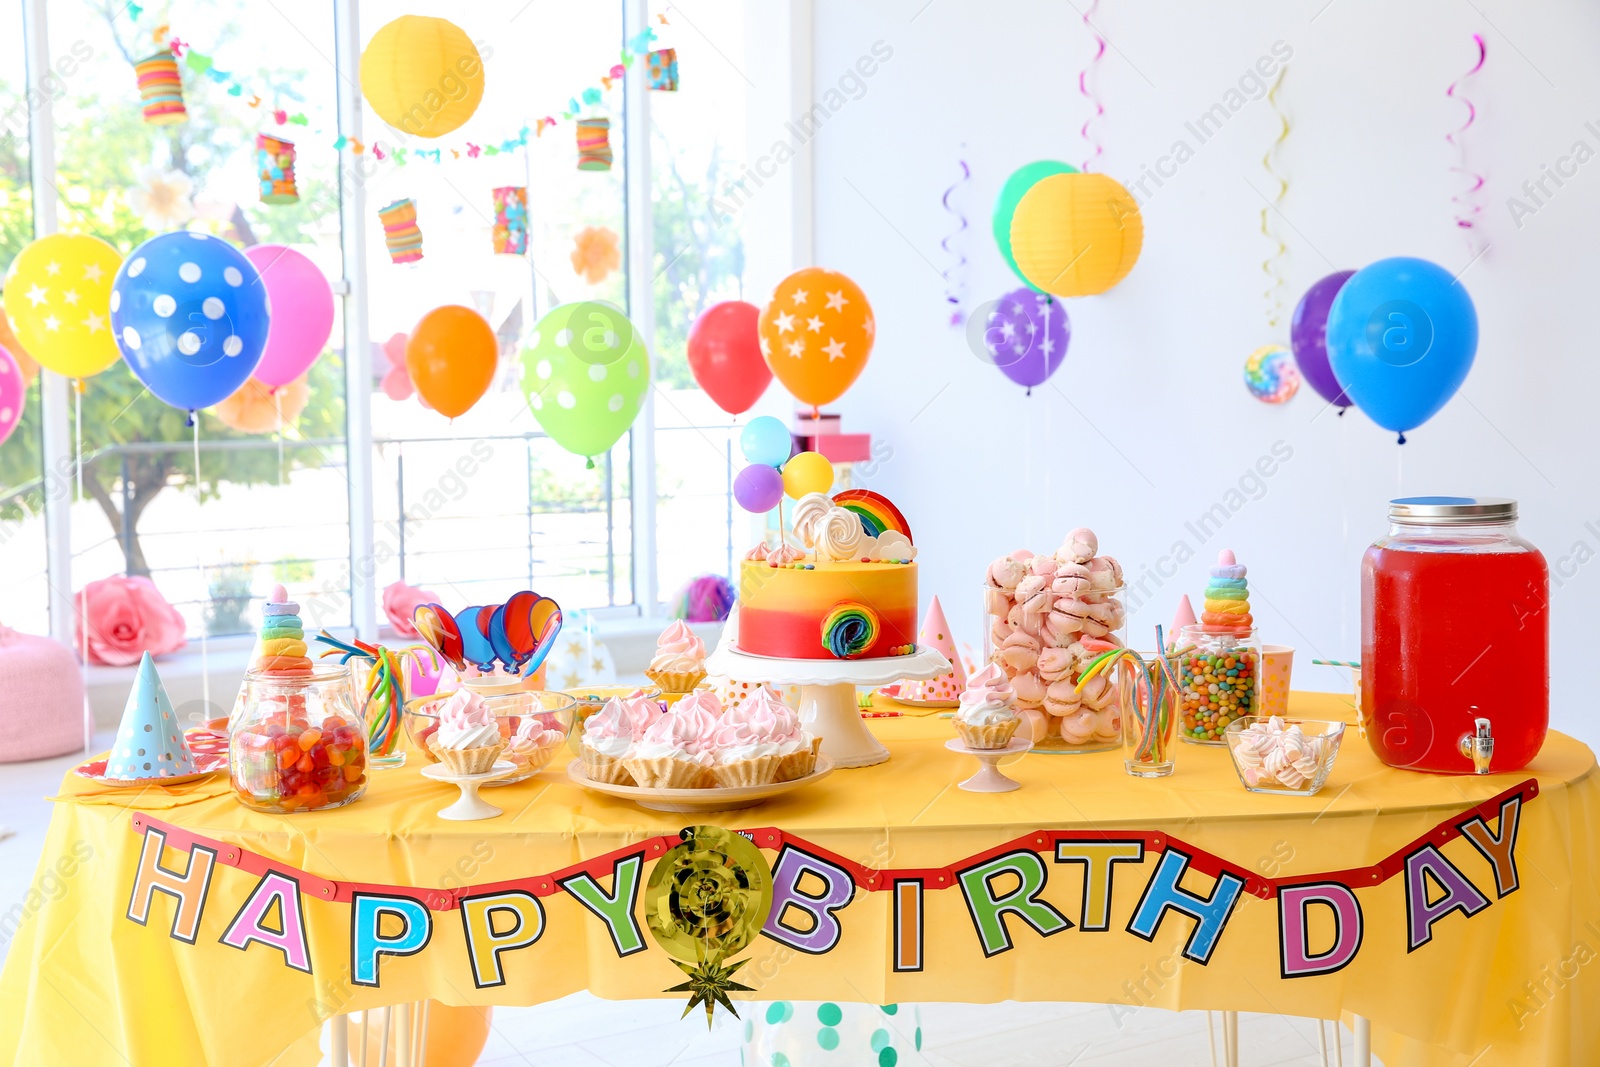 Photo of Table with birthday cake and delicious treats indoors